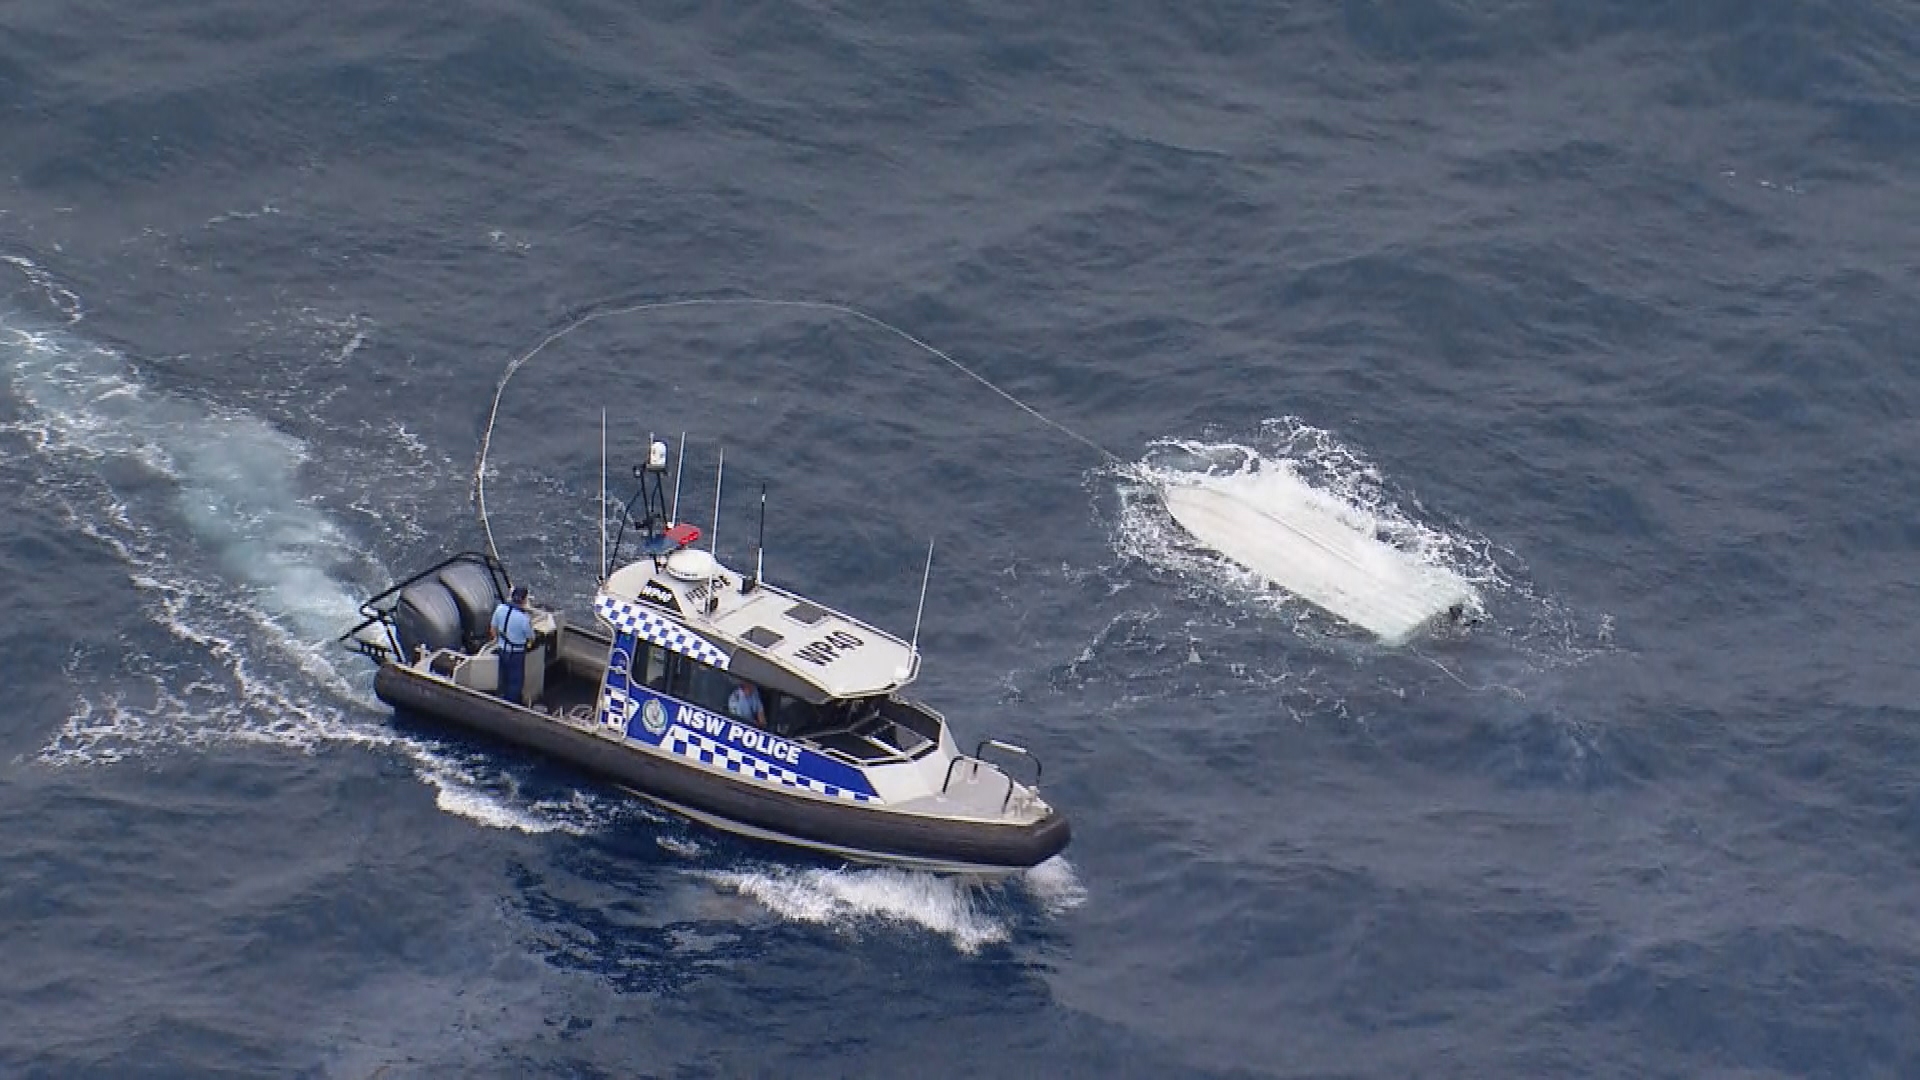 Three men have been rescued by three helicopters after a freak wave threw them overboard